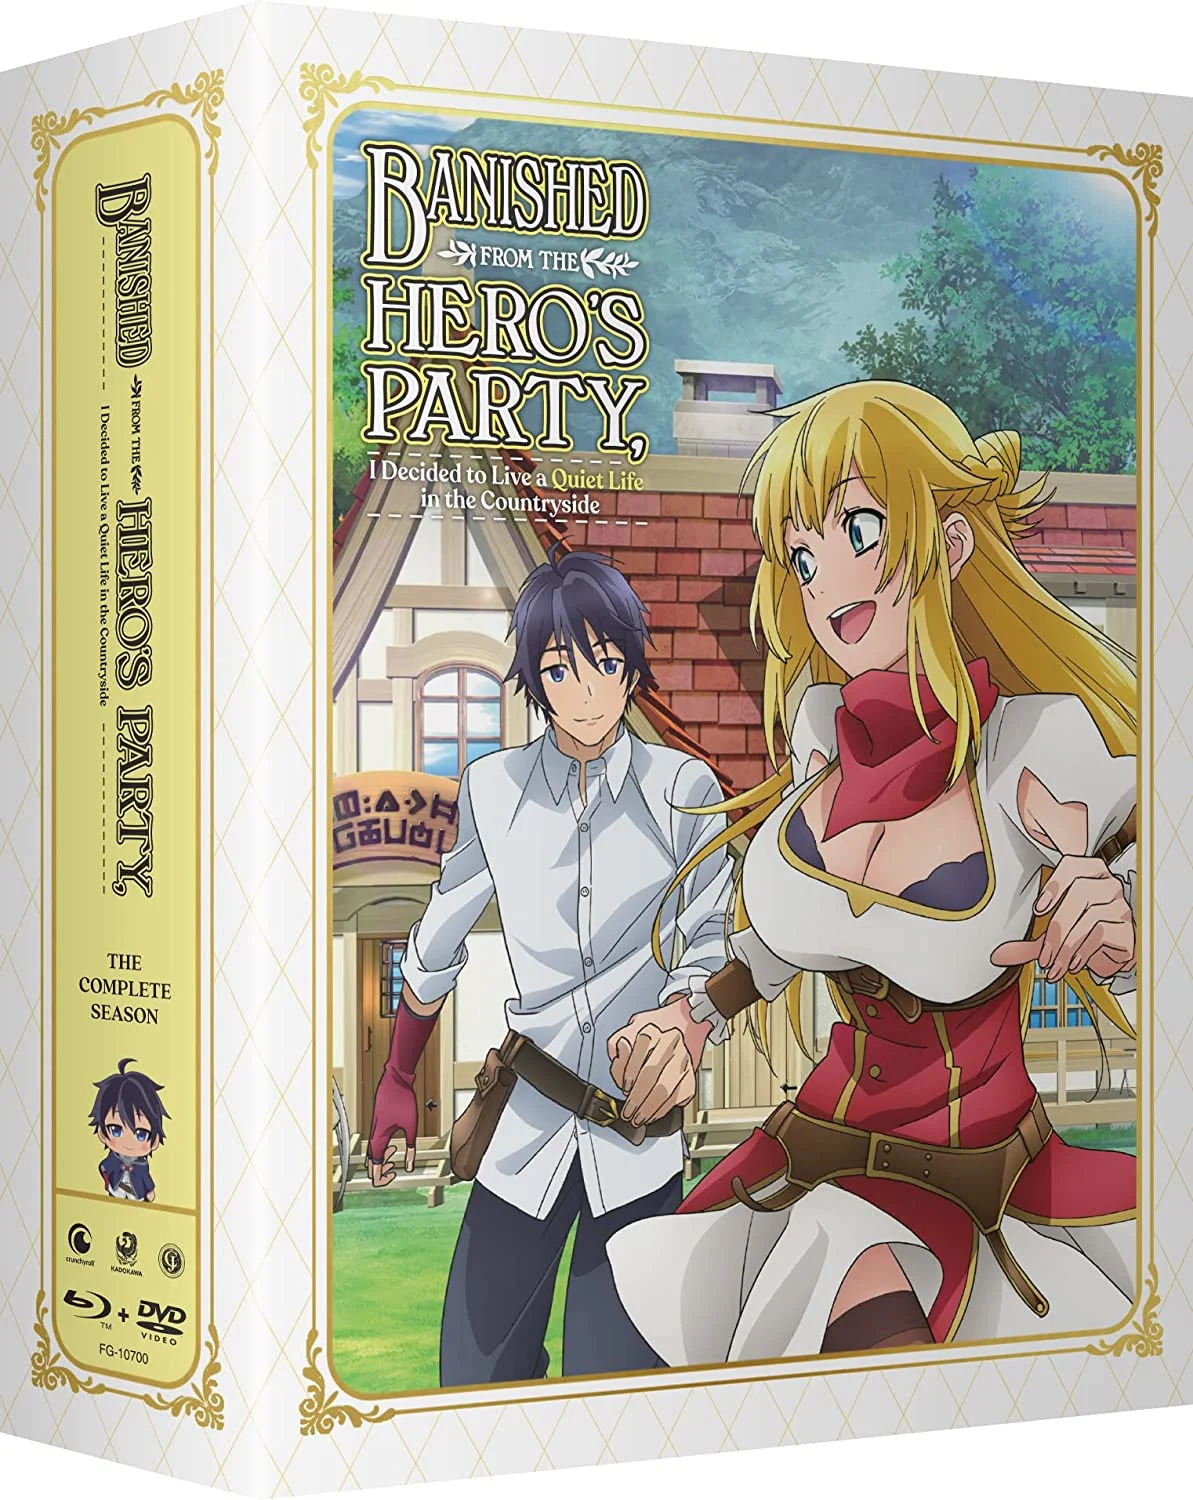 Banished from the Hero’s Party I Decided to Live a Quiet Life…: (CS) Ltd Edit (Blu-ray/DVD Combo)